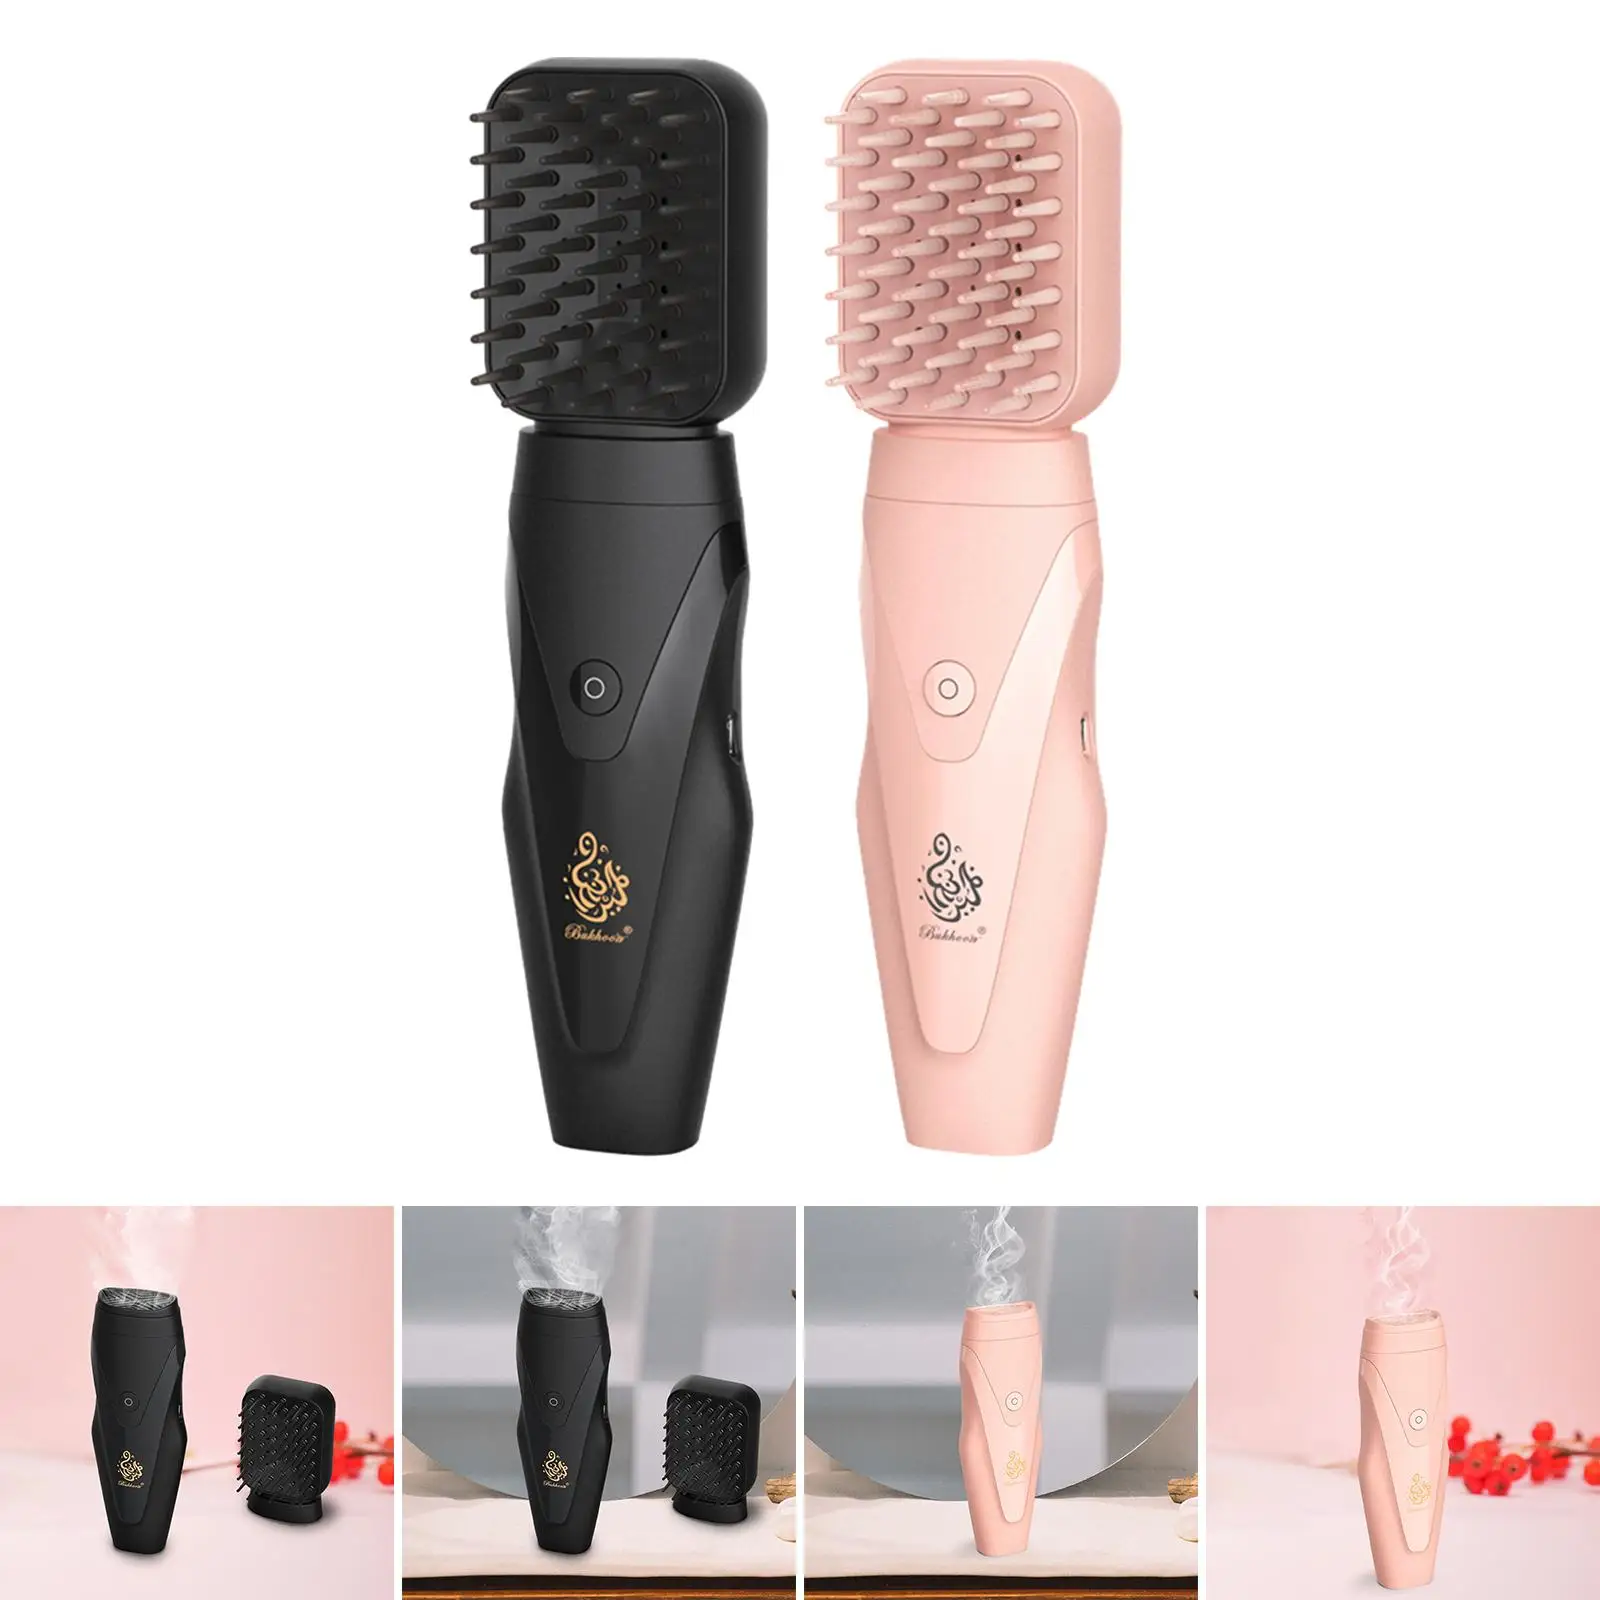 Incense Burner Rechargeable Replaces Comb Head for Yoga Hotels Libraries